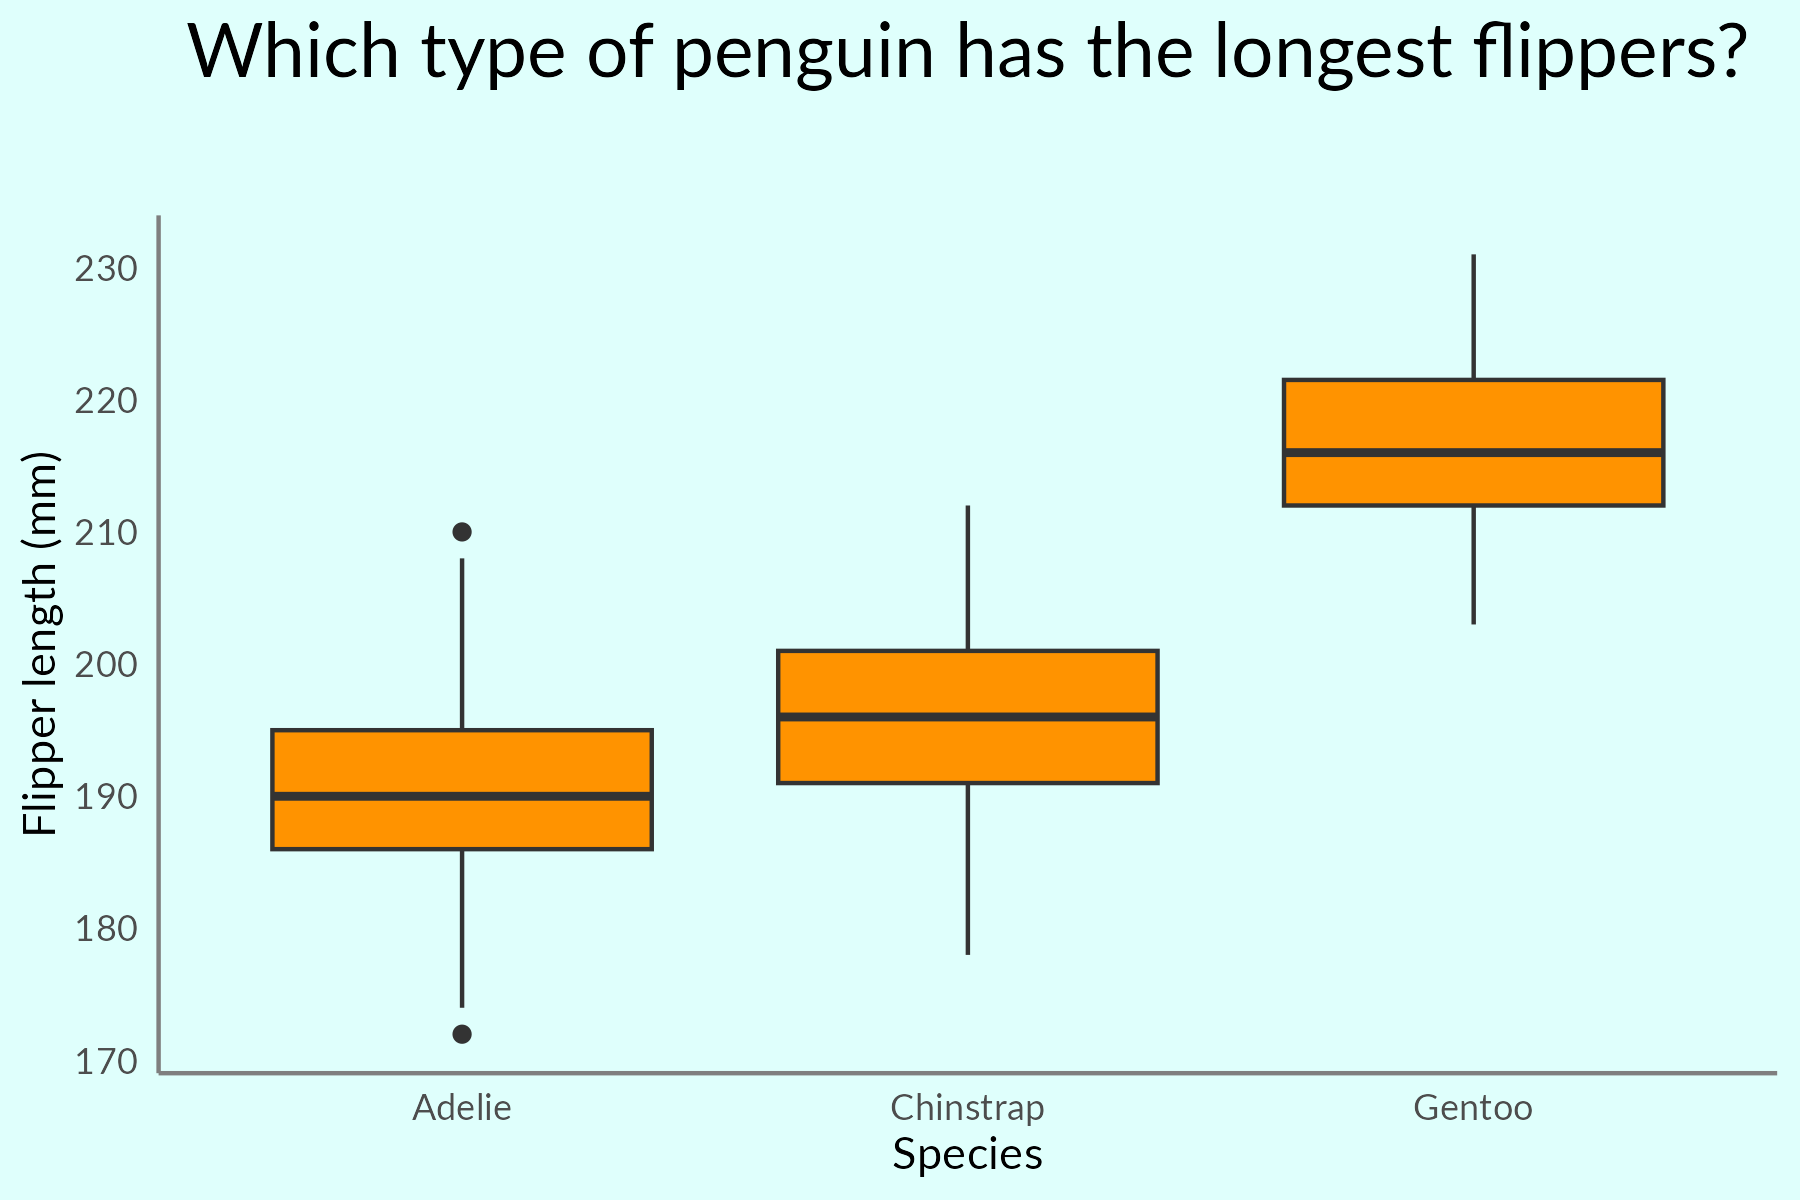 A boxplot (vertical arrangement) with penguin flipper length (mm) on the y axis and species on  x axis. Adelie penguins have median 190 and (LQ, UQ) = (185, 195). Chinstrap penguins have median 195 and (LQ, UQ) = (190, 200). Adelie penguins have median 215 and (LQ, UQ) = (210, 2205).